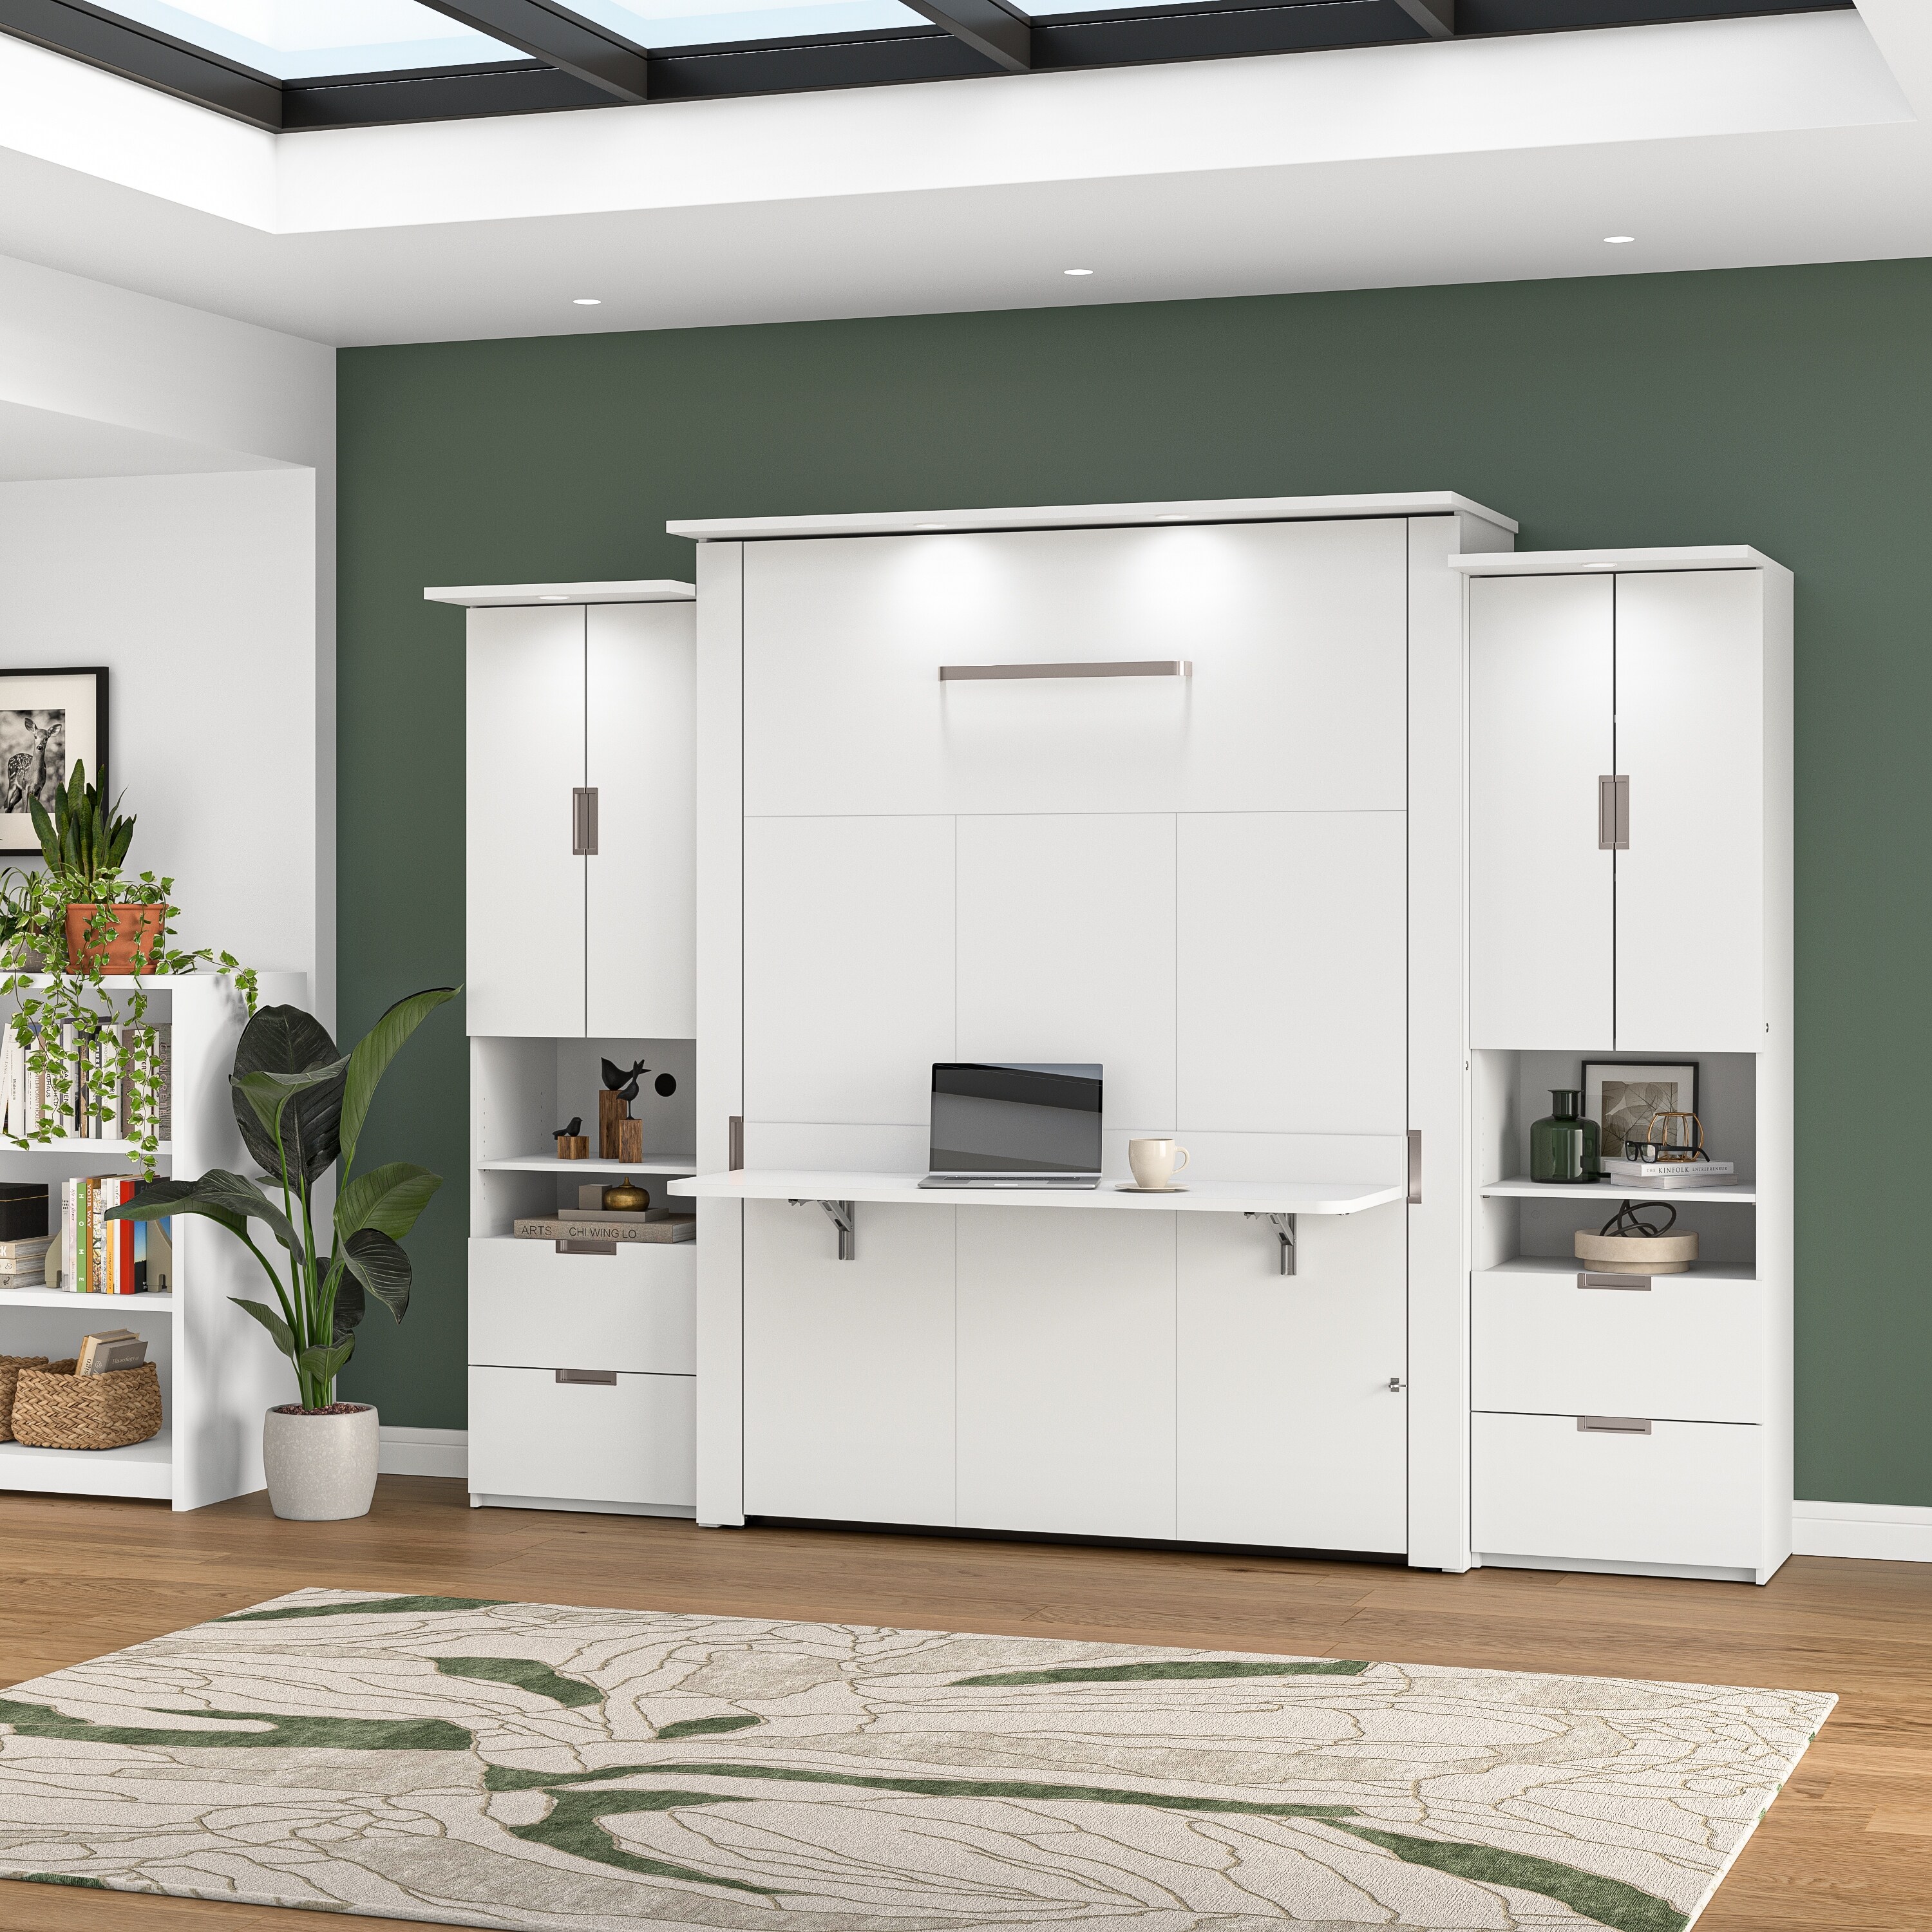 Lumina Queen Murphy Bed With Desk And 2 Storage Cabinets By Bestar